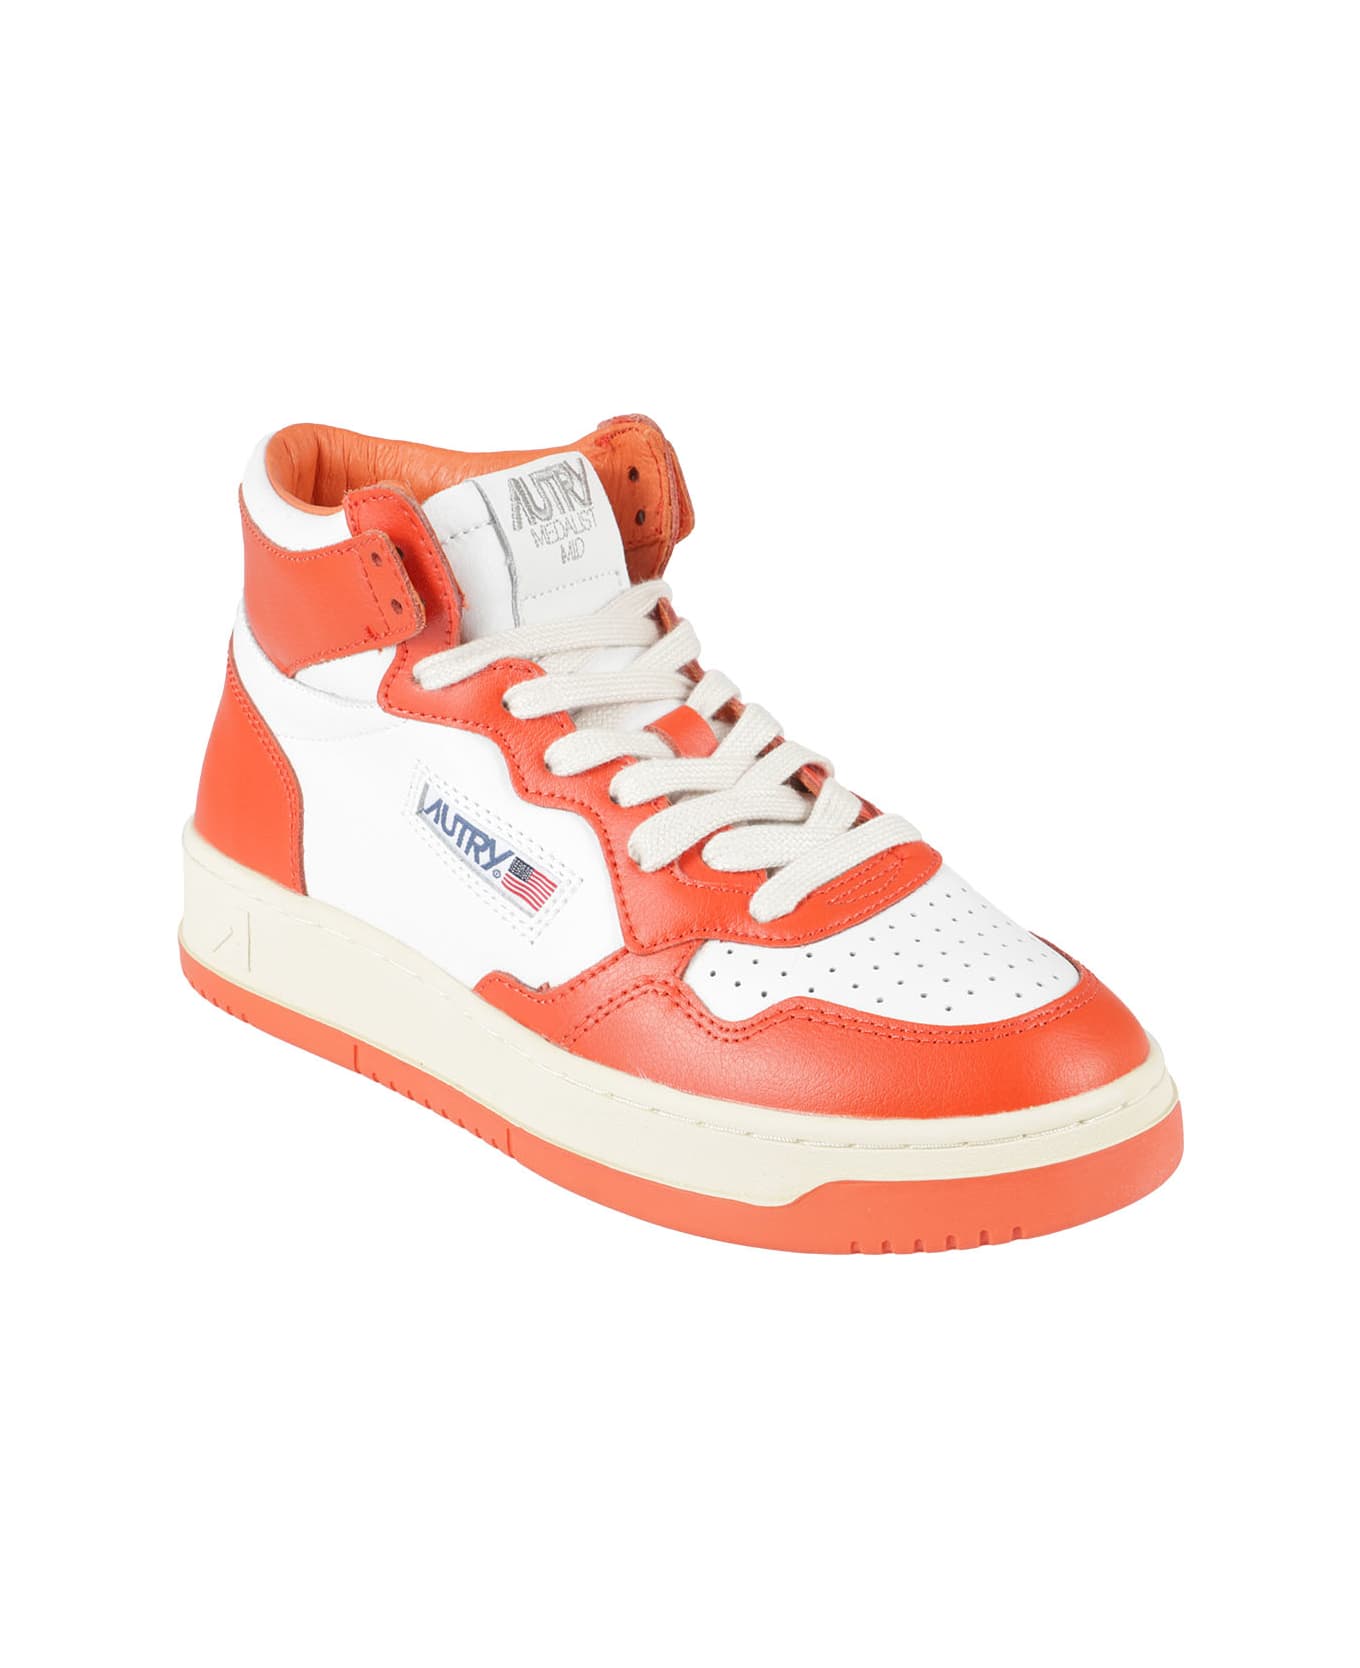 Autry Medalist Mid Sneakers Aumw Wb21 - Leat Tangerine スニーカー